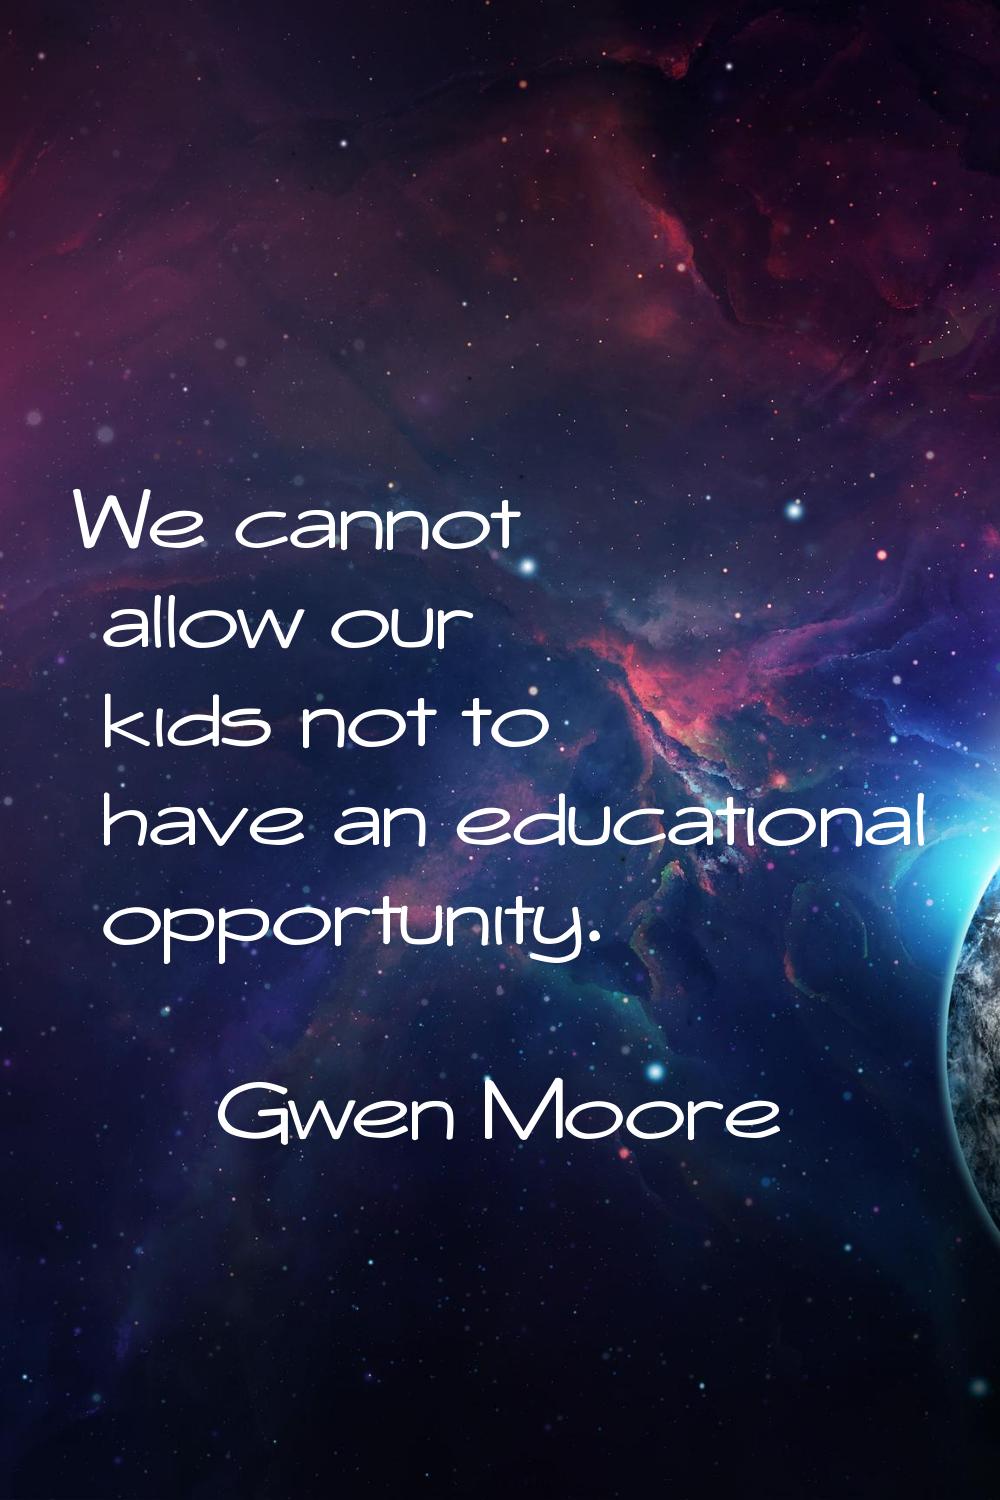 We cannot allow our kids not to have an educational opportunity.